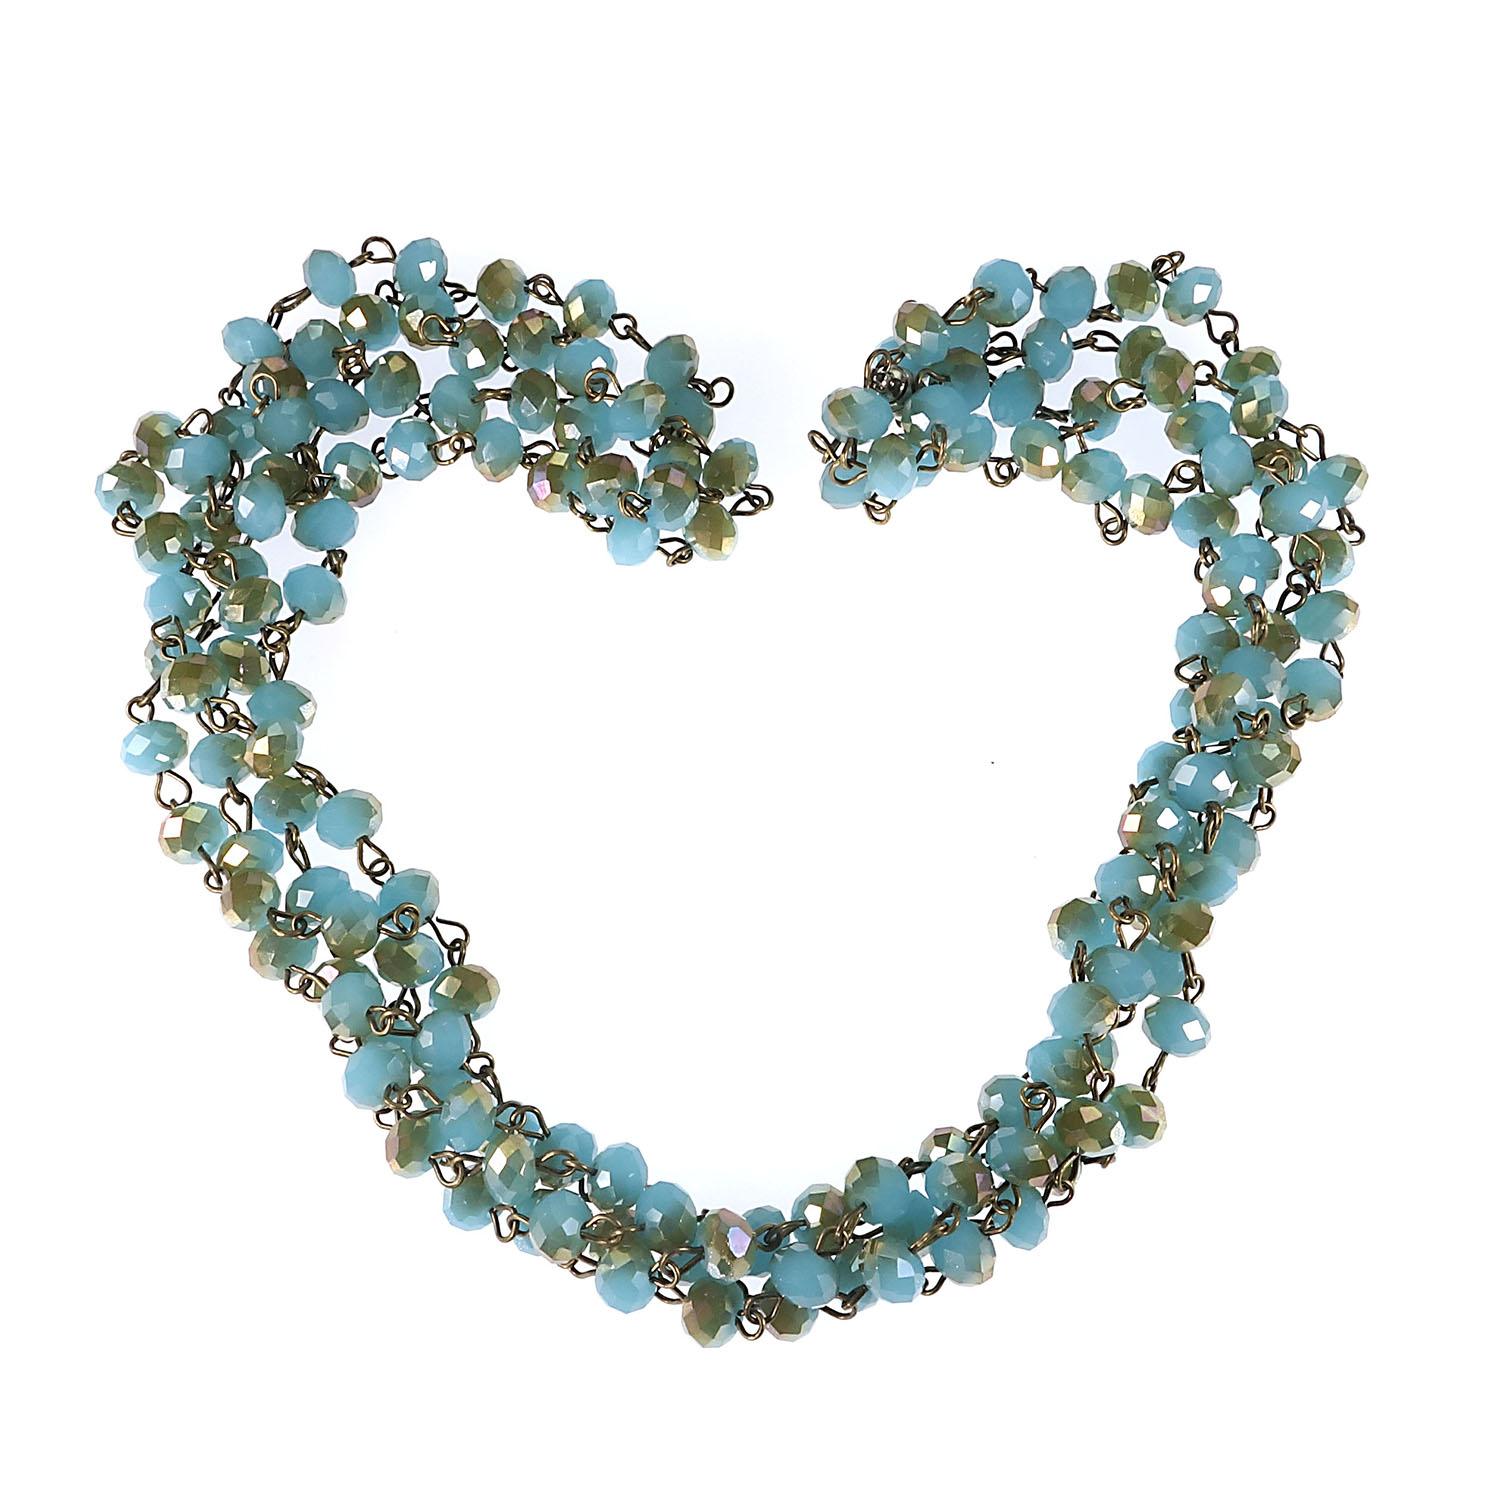 AJD Teal / Bronzy Crystal Bead Necklace  Great Gift! For Sale 2